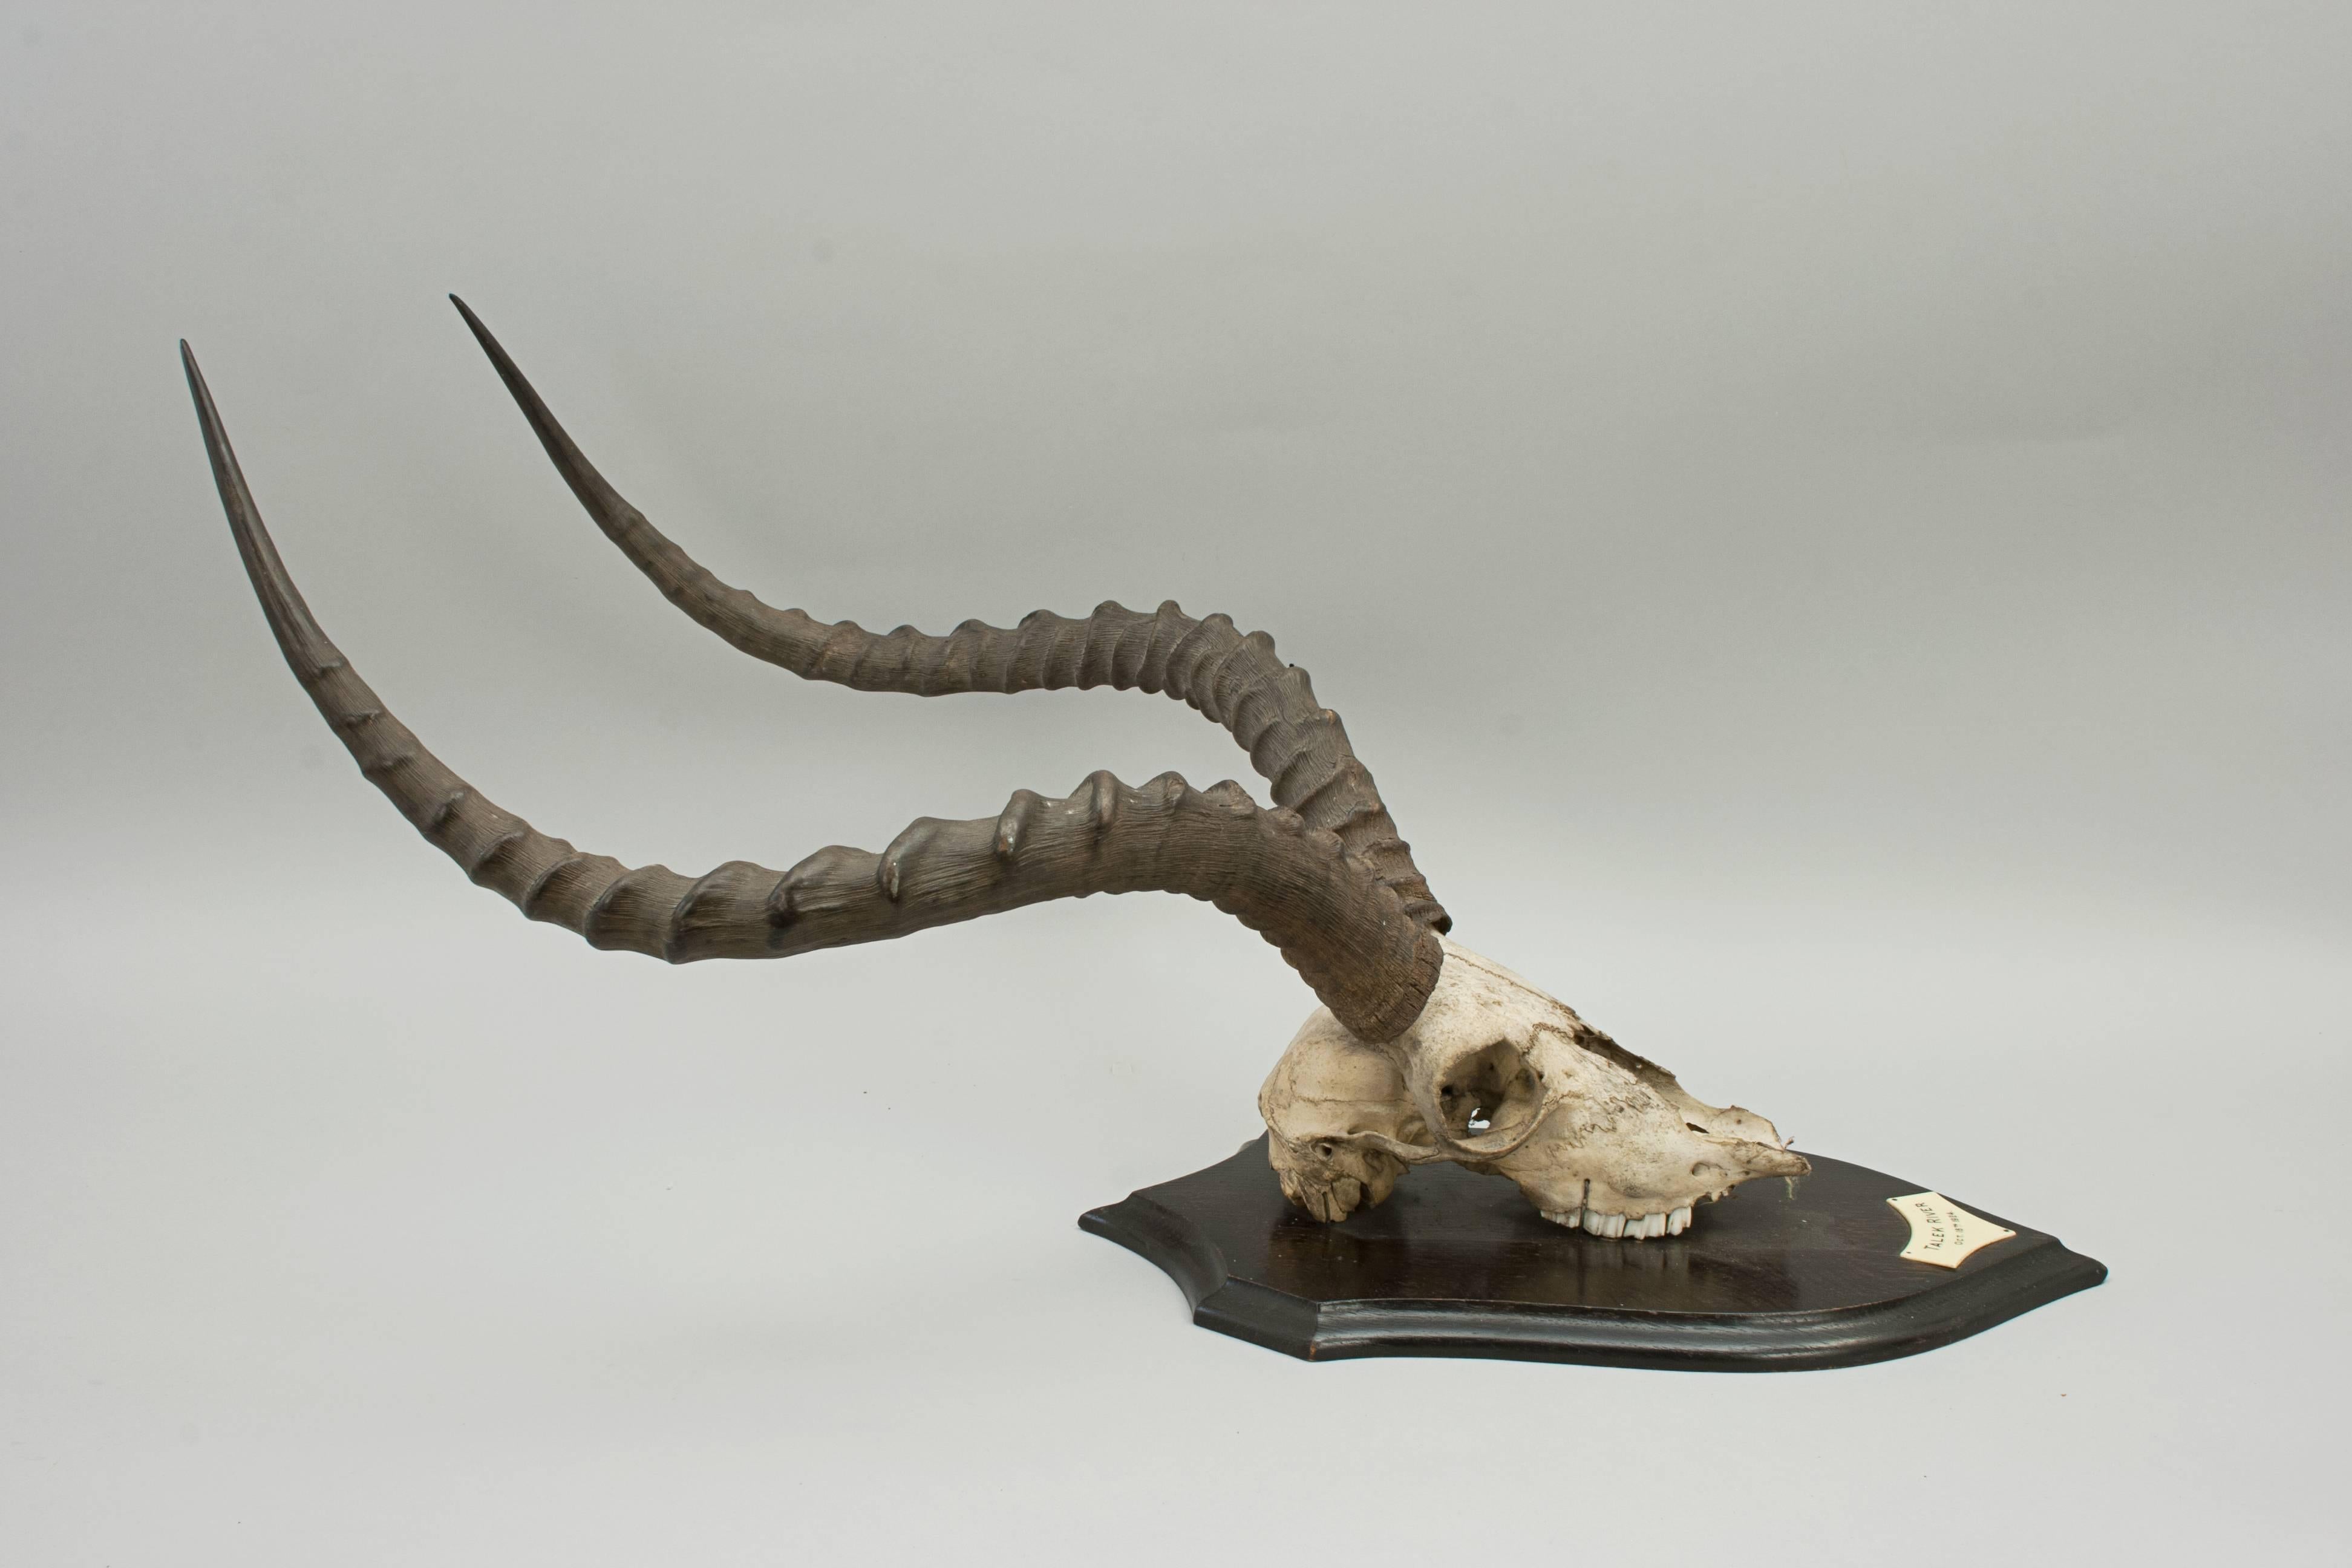 Taxidermy hartebeest scull by Rowland Ward.
An excellent mounted hartebeest scull and horns on oak shield by the renowned British taxidermist, Rowland Ward of Piccadilly. The shaped shield with ivorine plaque to the front 'Talek River, October 18th